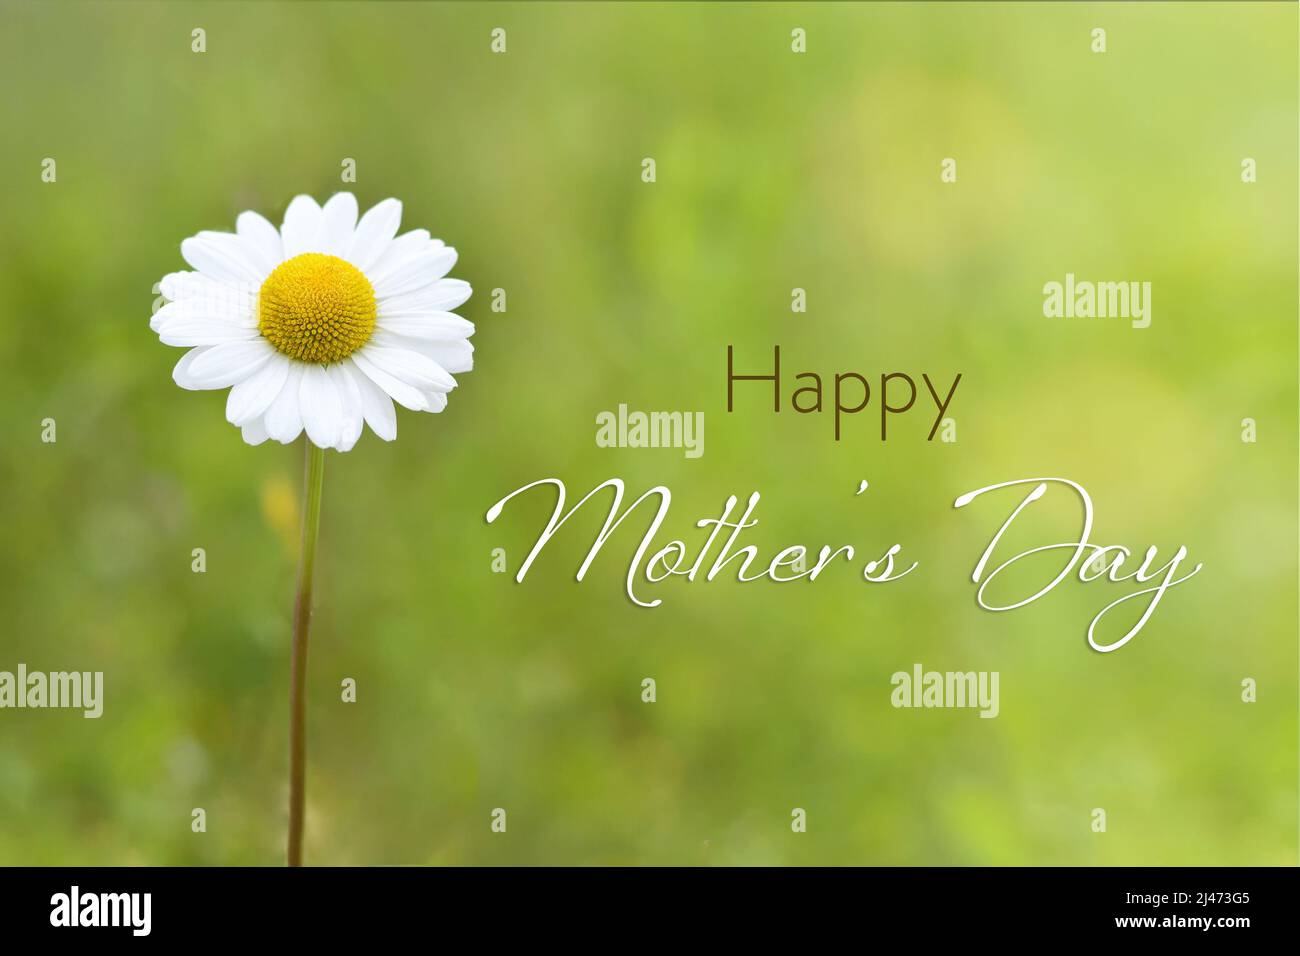 Happy Mothers Day card with a daisy flower on green background Stock Photo